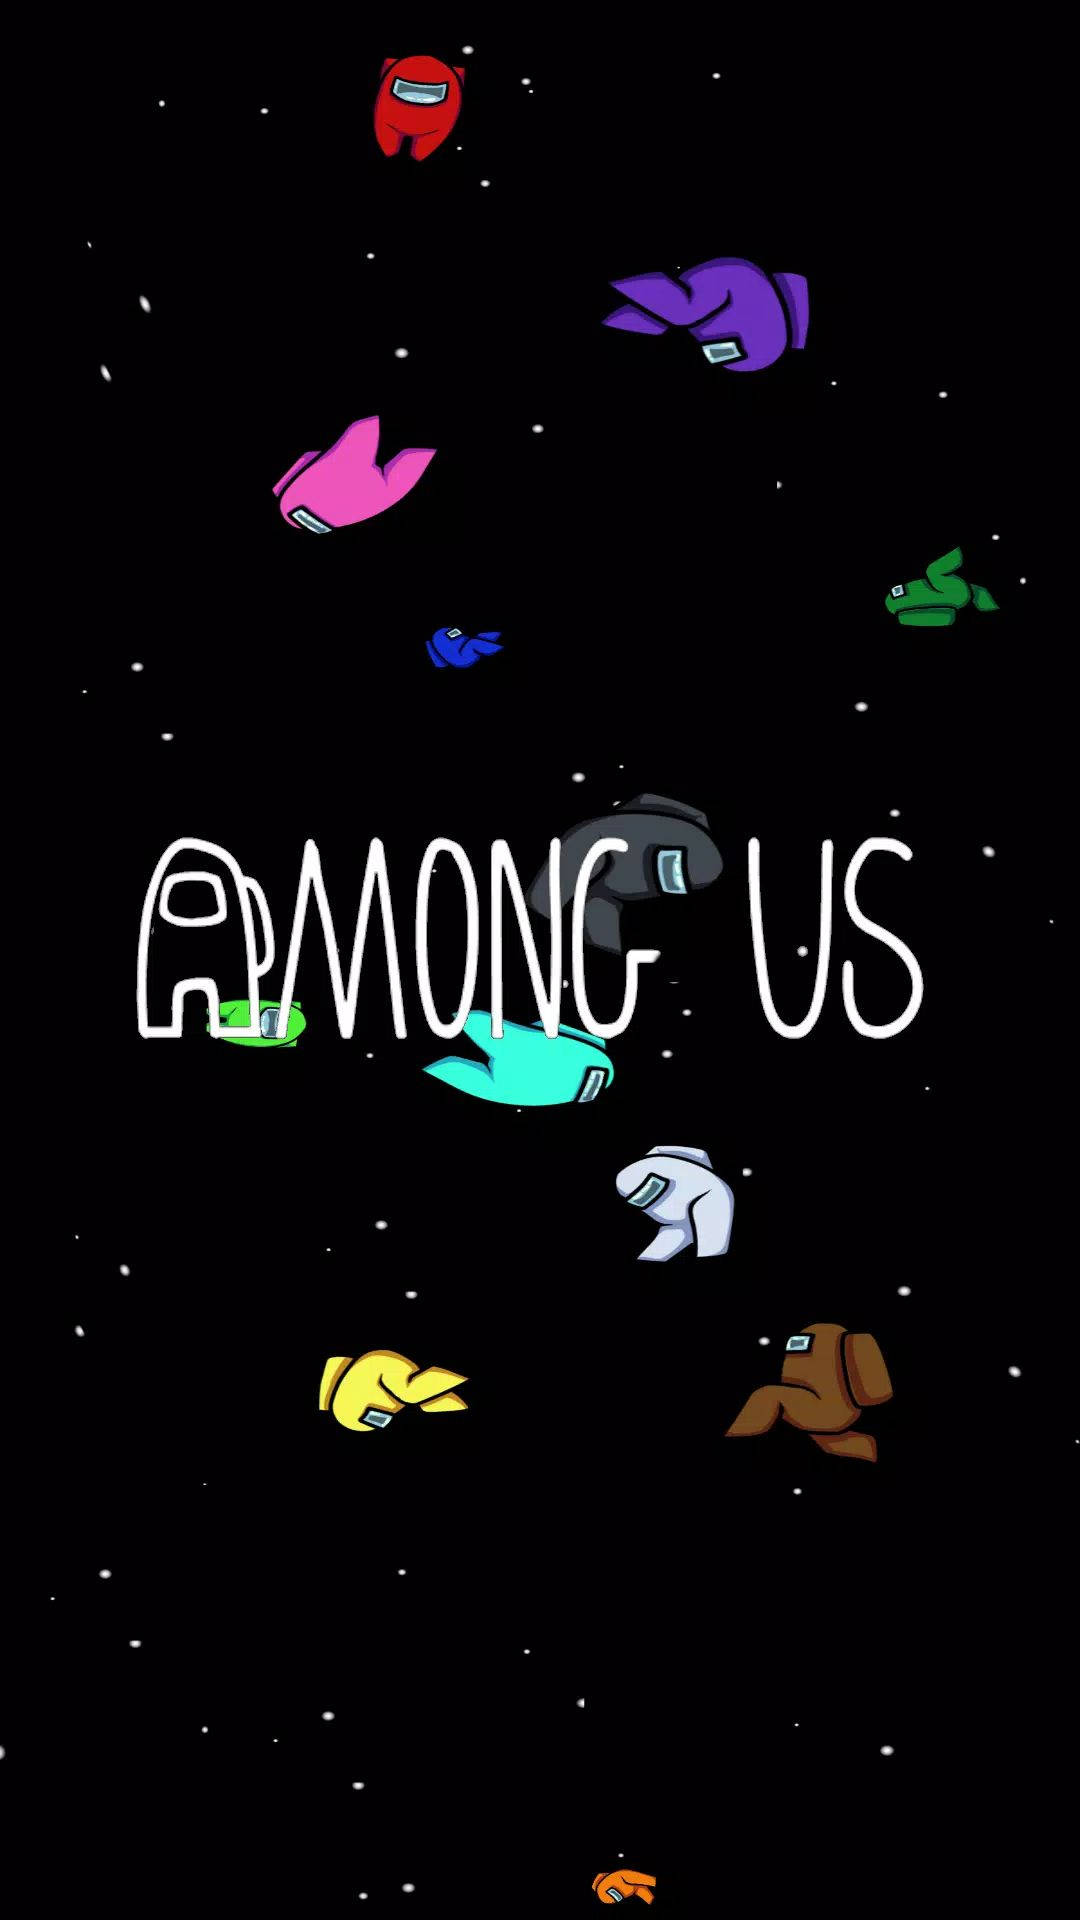 Among Us Game Title In Space